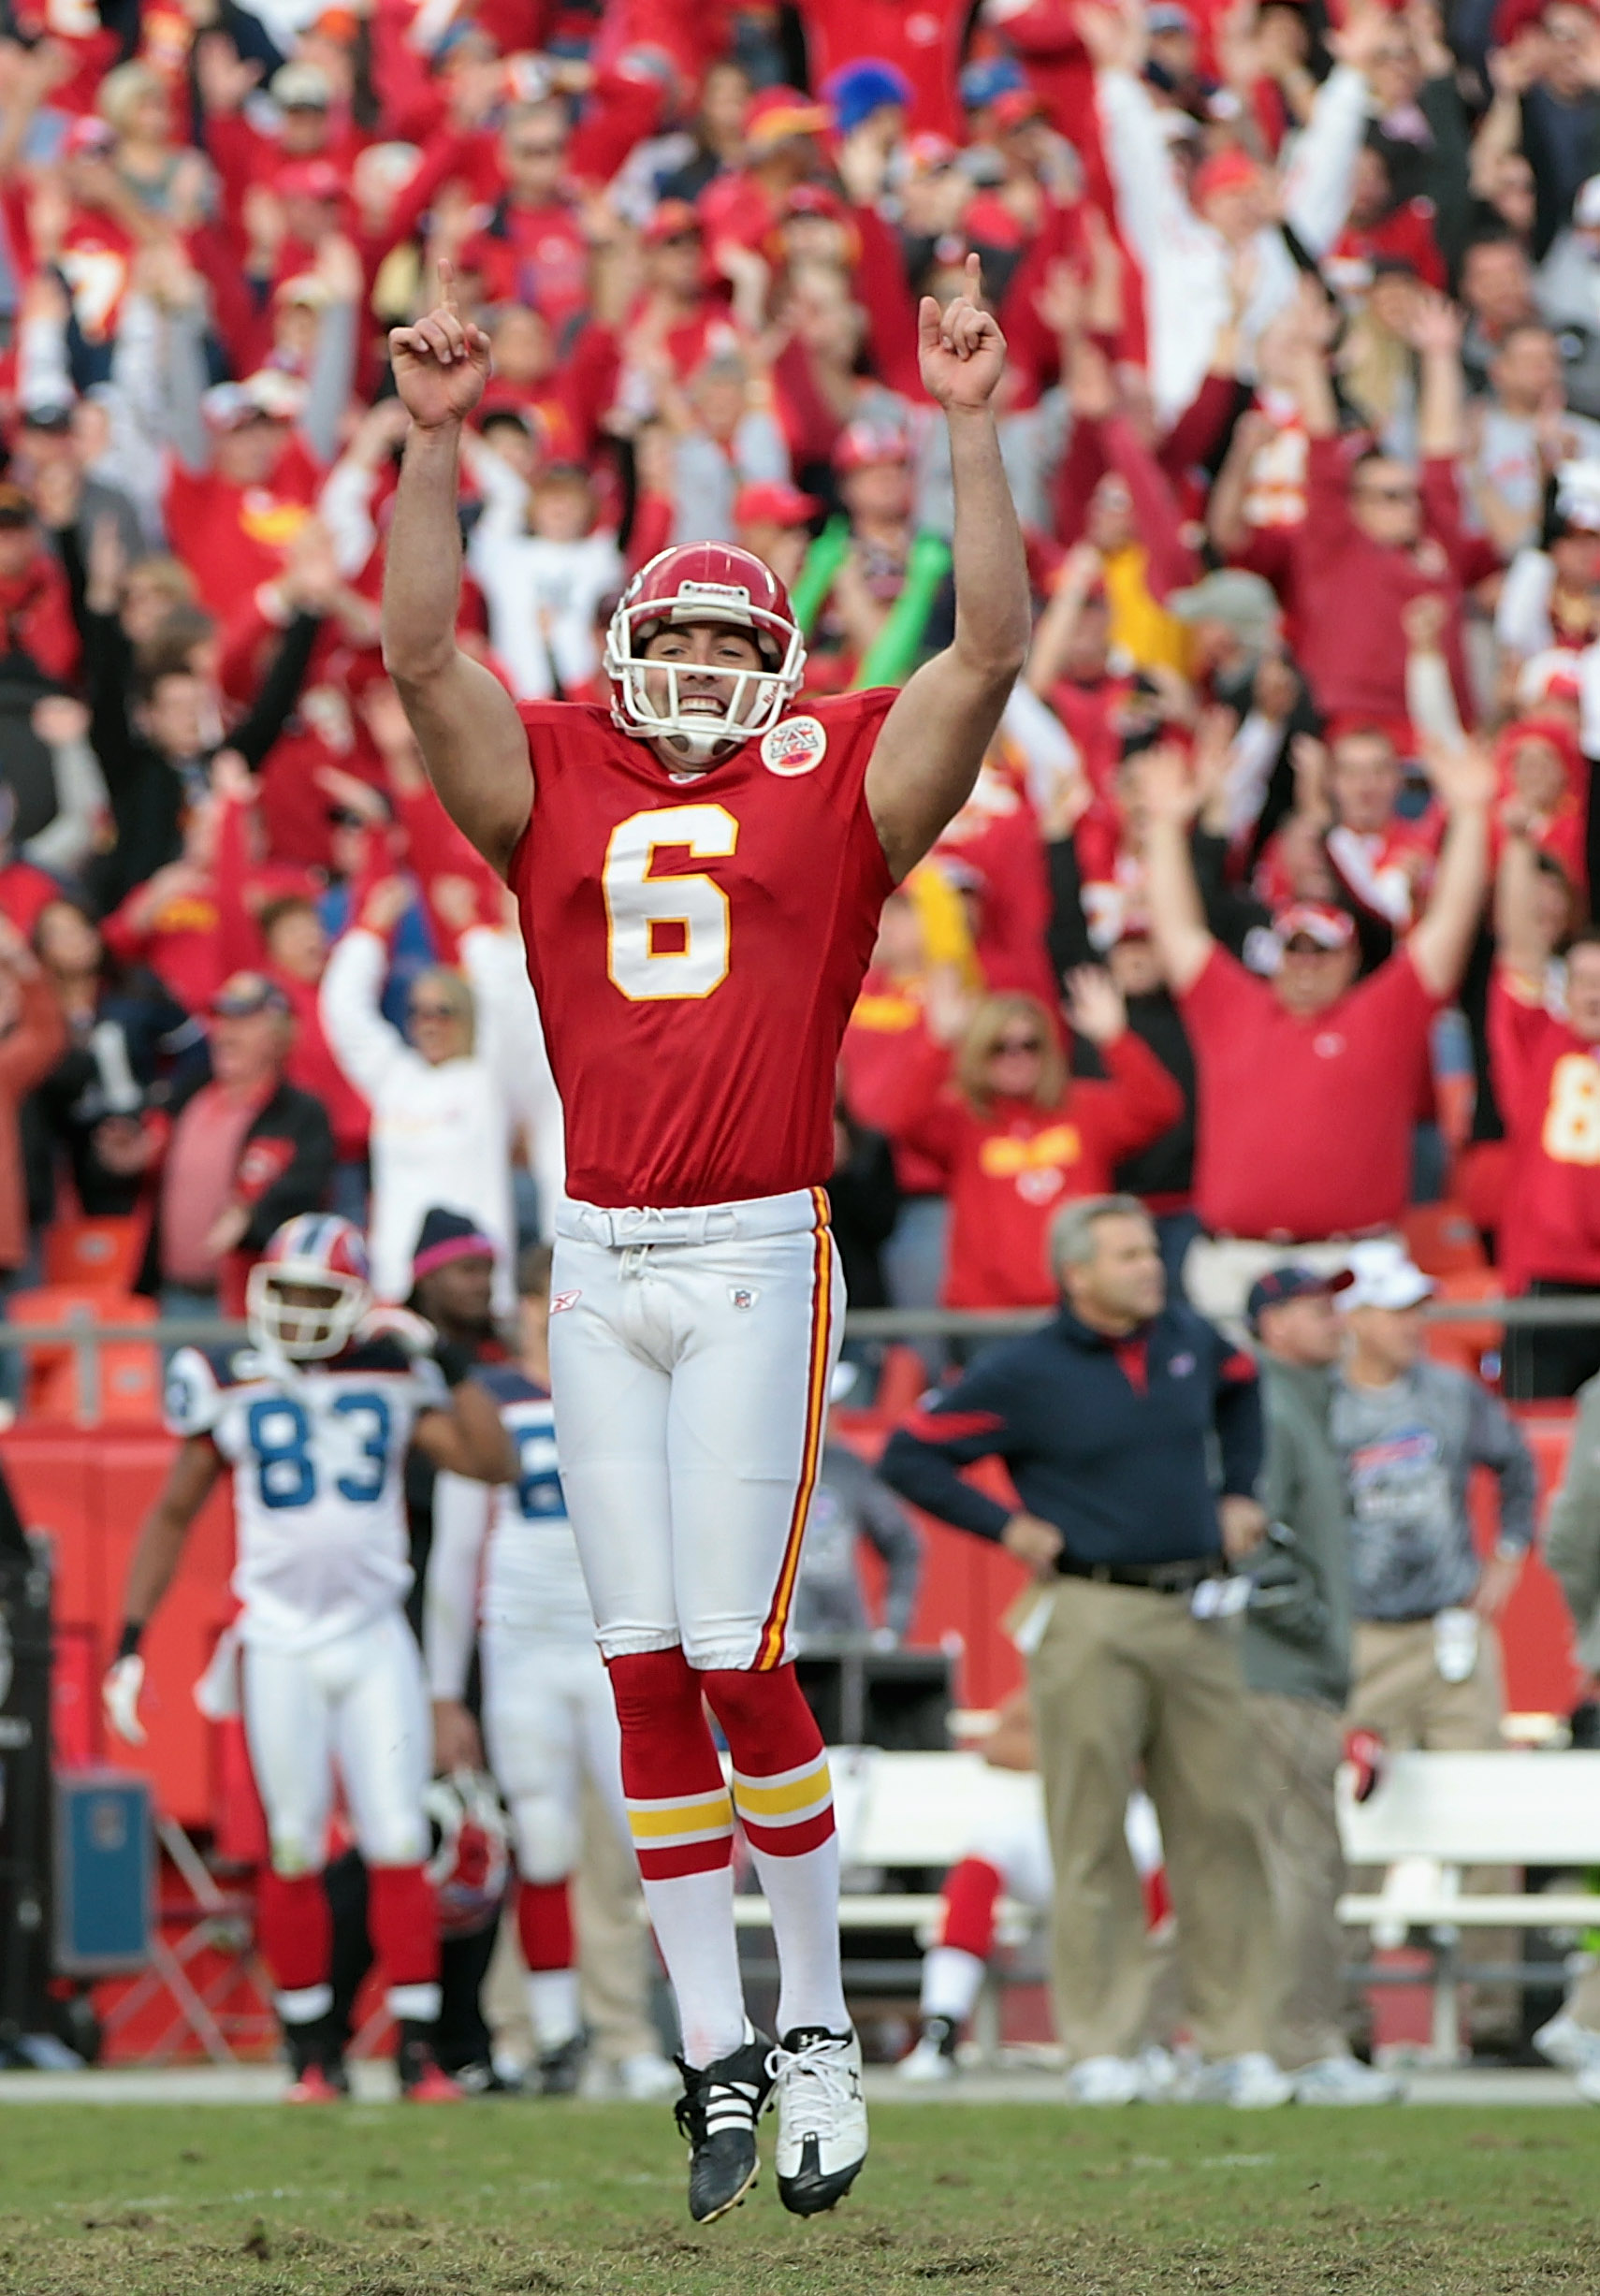 KANSAS CITY, MO - OCTOBER 31:  Kicker Ryan Succop #6 of the Kansas City Chiefs celebrates after making a filed goal in overtime to win the game against the Buffalo Bills on October 31, 2010  at Arrowhead Stadium in Kansas City, Missouri.  (Photo by Jamie 